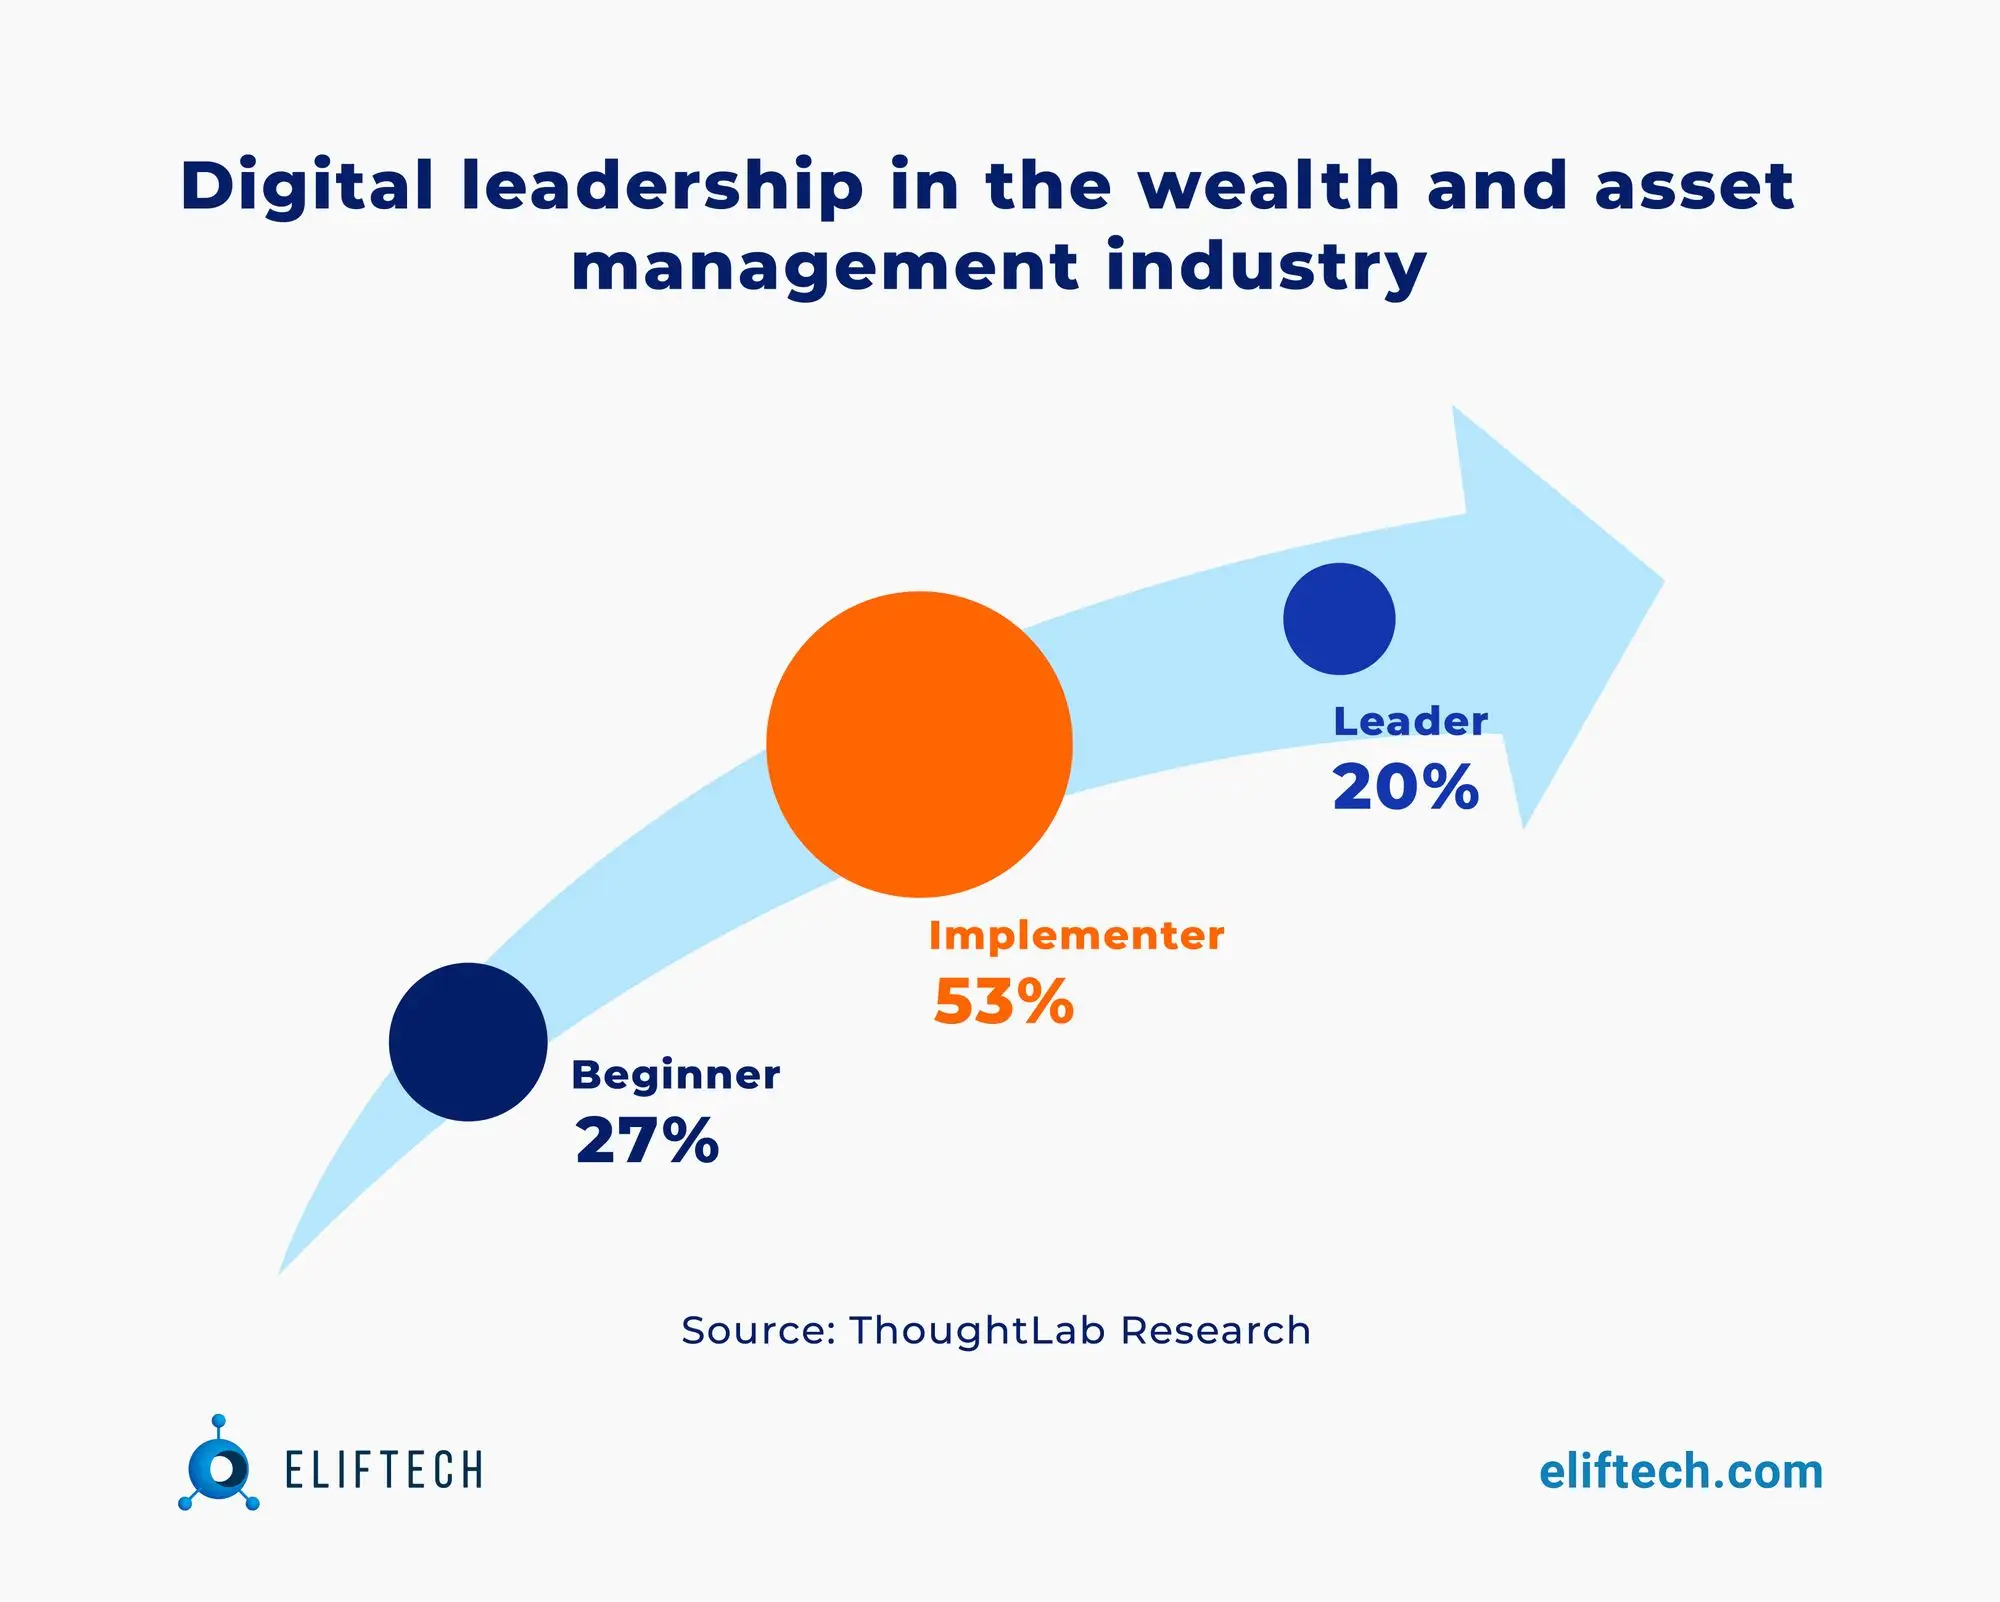 Figure 1. Digital Leadership in the Wealth and Asset Management Industry